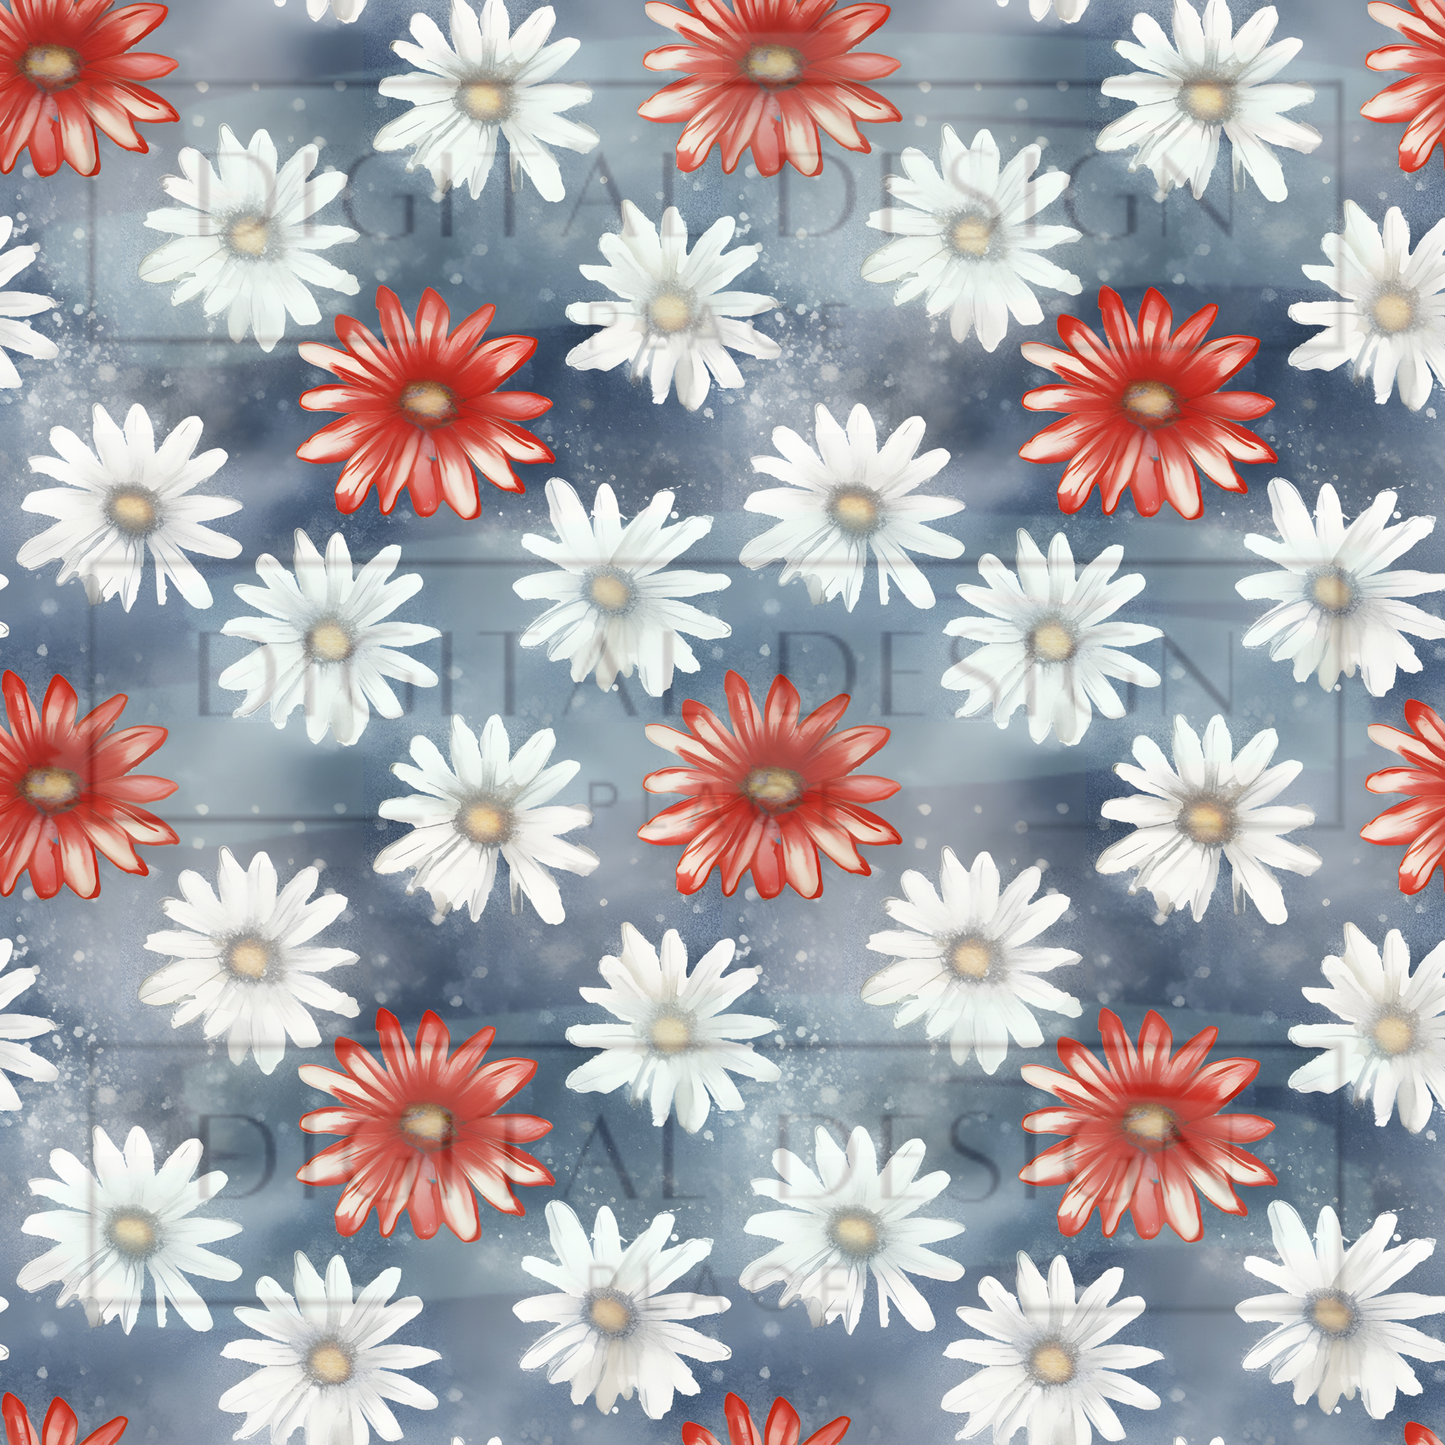 Red White and Blue Daisy VinylV1414